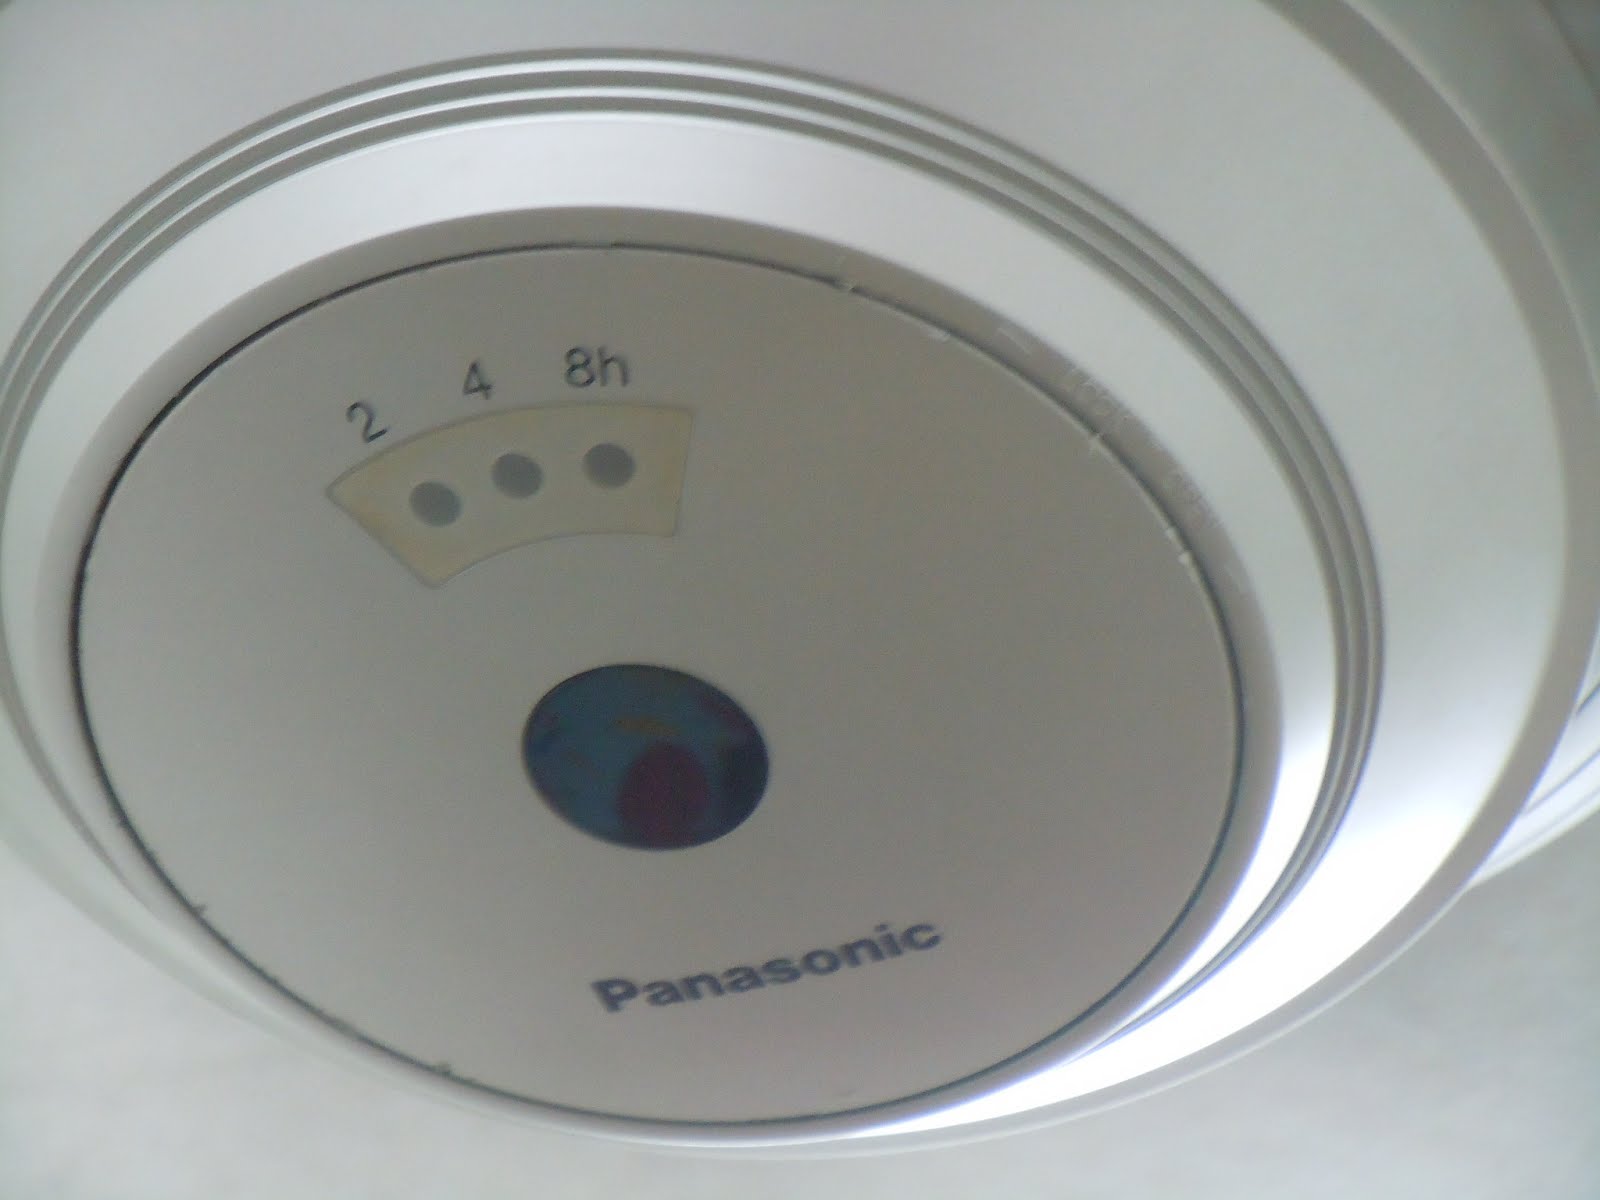 Panasonic F My 143 Ceiling Fan Slow Why Solved